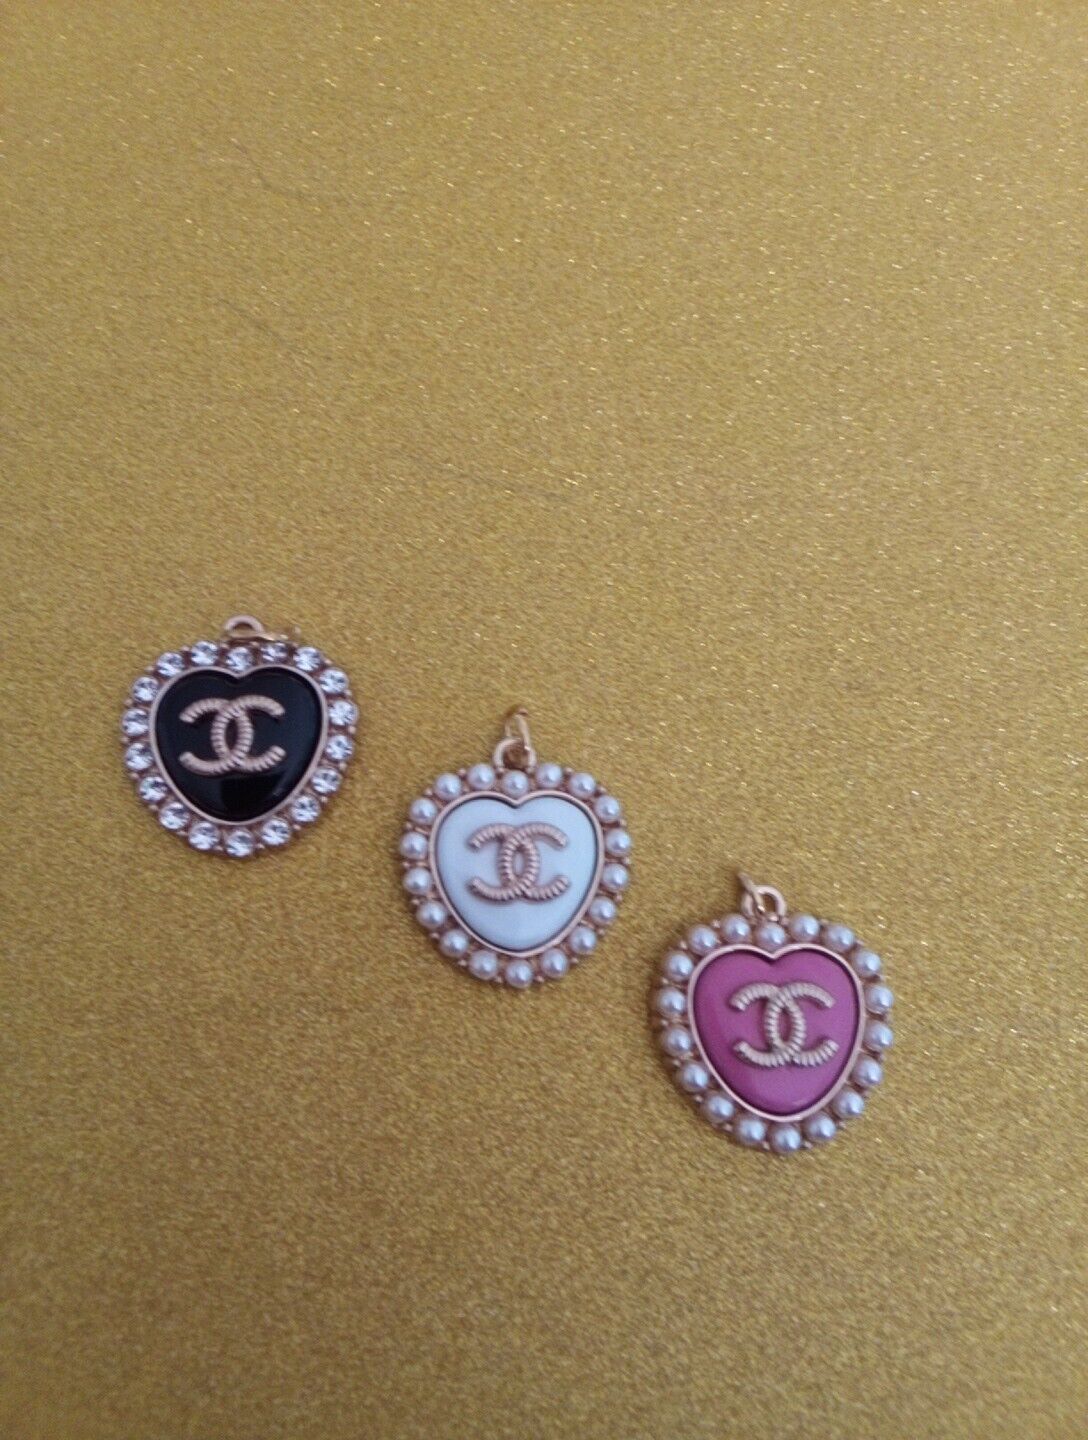 Lot Of 3 Stamped Chanel Zipper Pull Button Charms